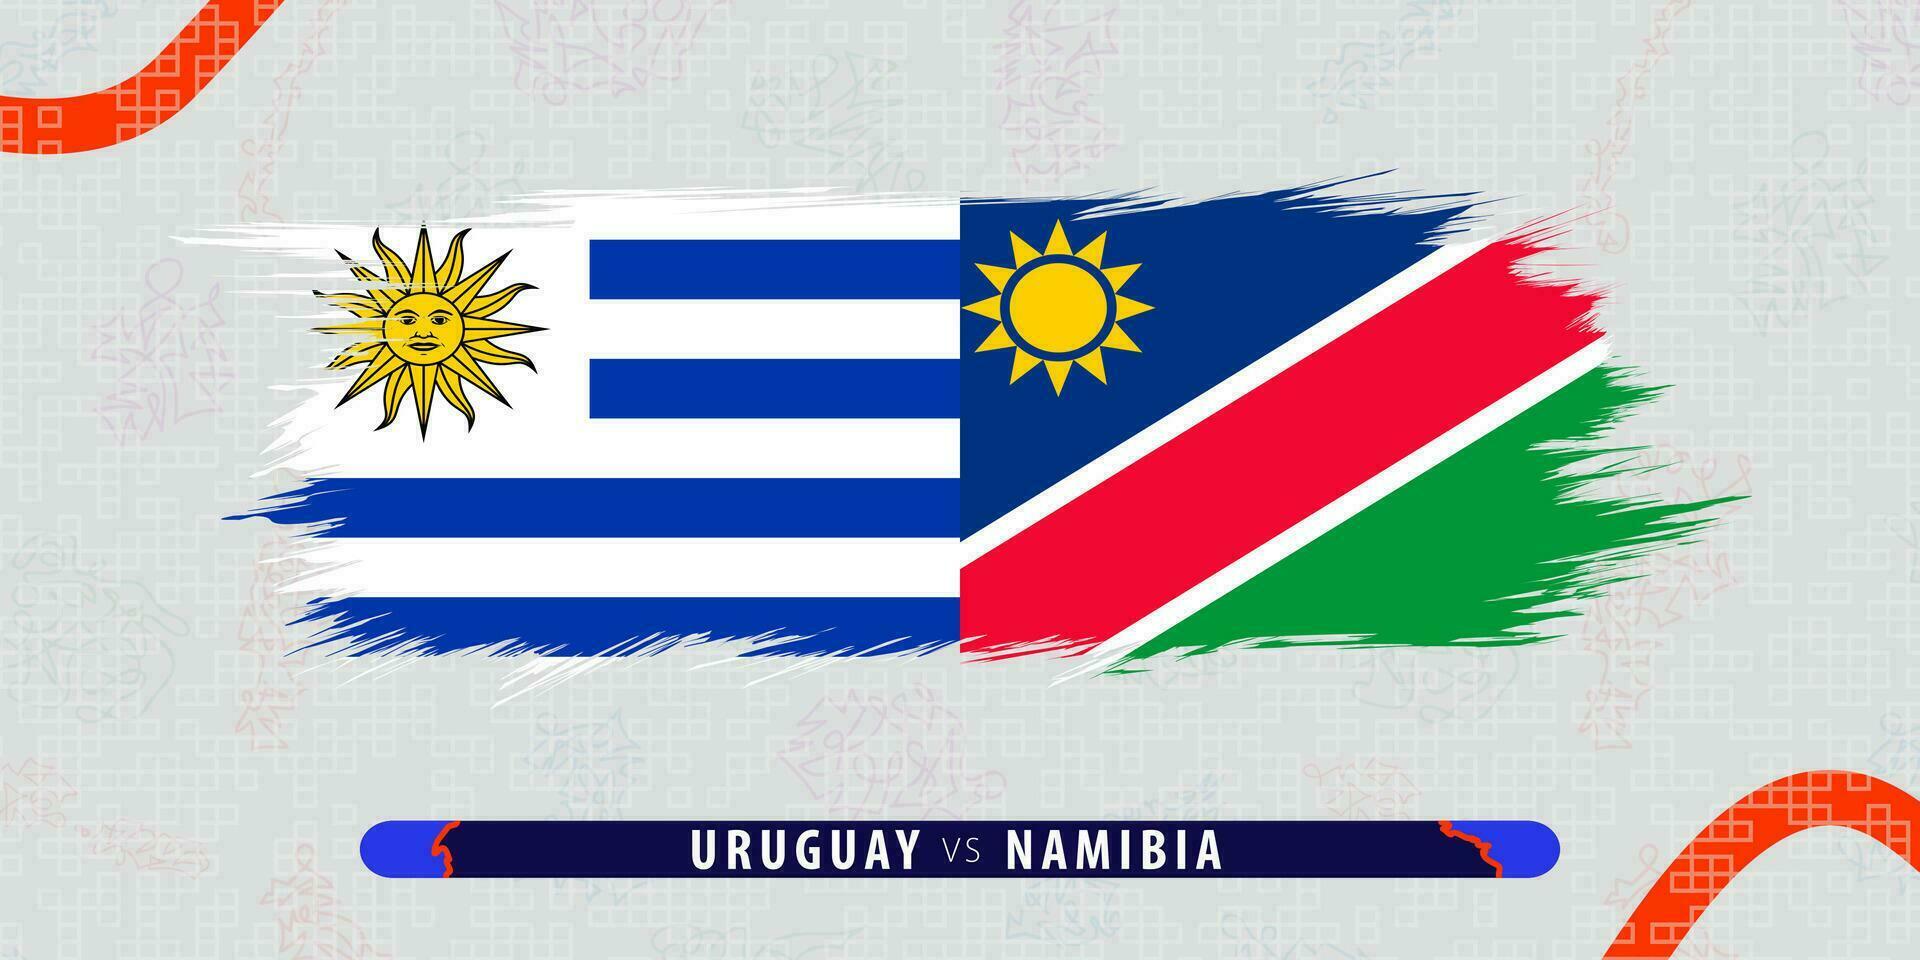 Uruguay vs Namibia, international rugby match illustration in brushstroke style. Abstract grungy icon for rugby match. vector